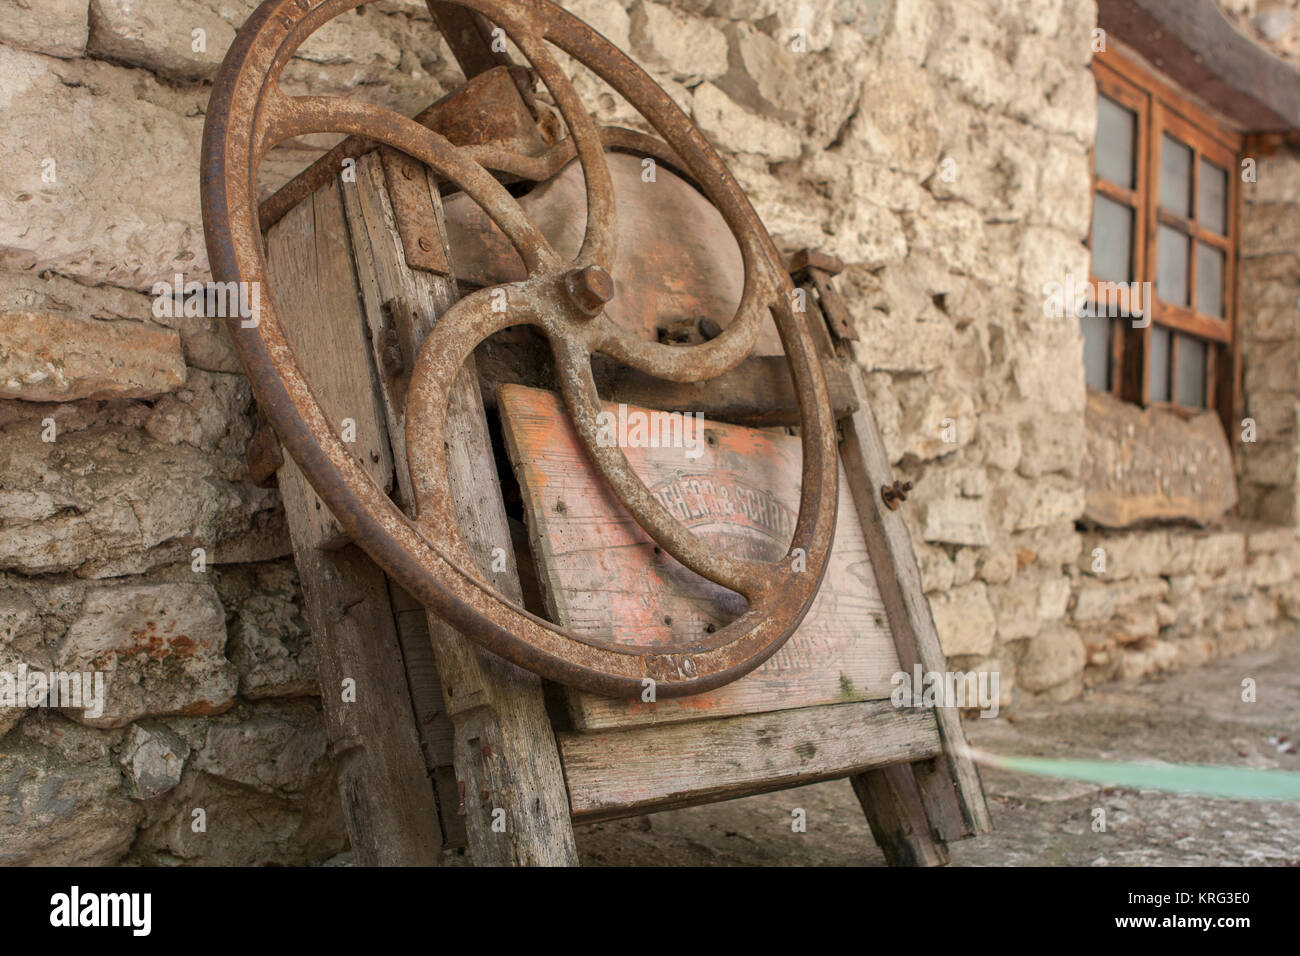 old rusted metal wheel of sewing machine Stock Photo